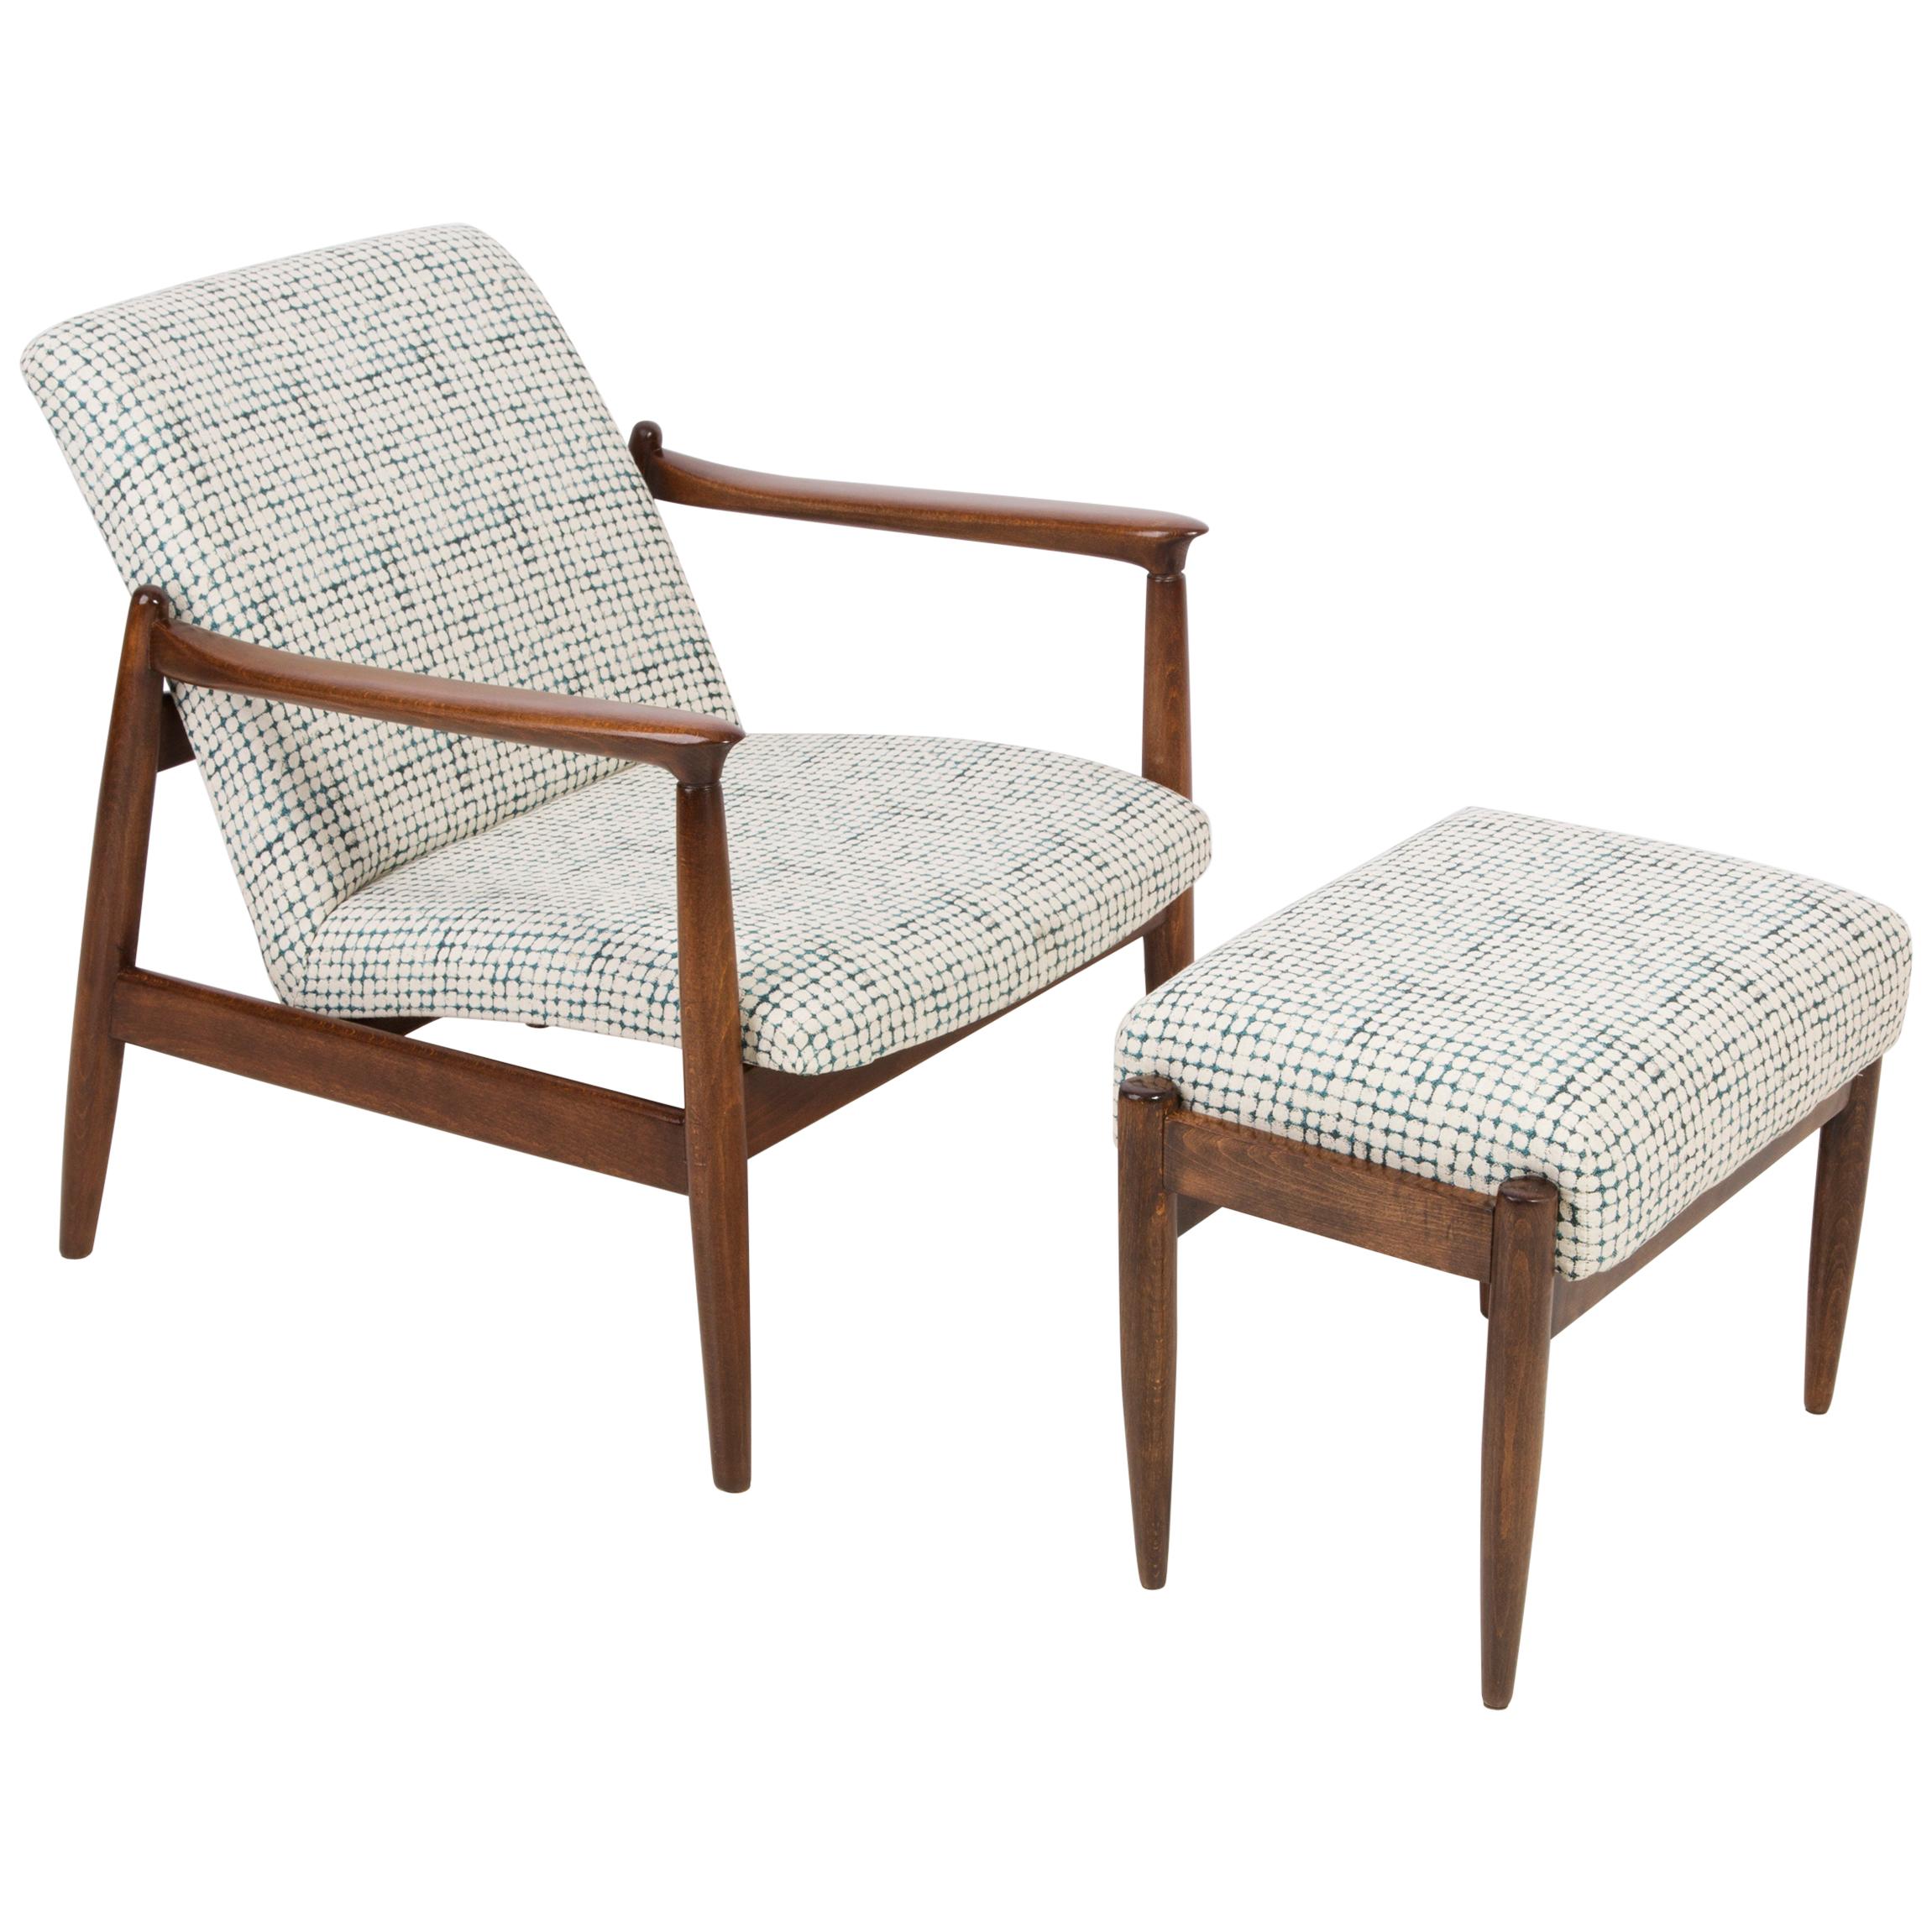 White and Aqua Vintage Armchair and Stool, Edmund Homa, 1960s For Sale